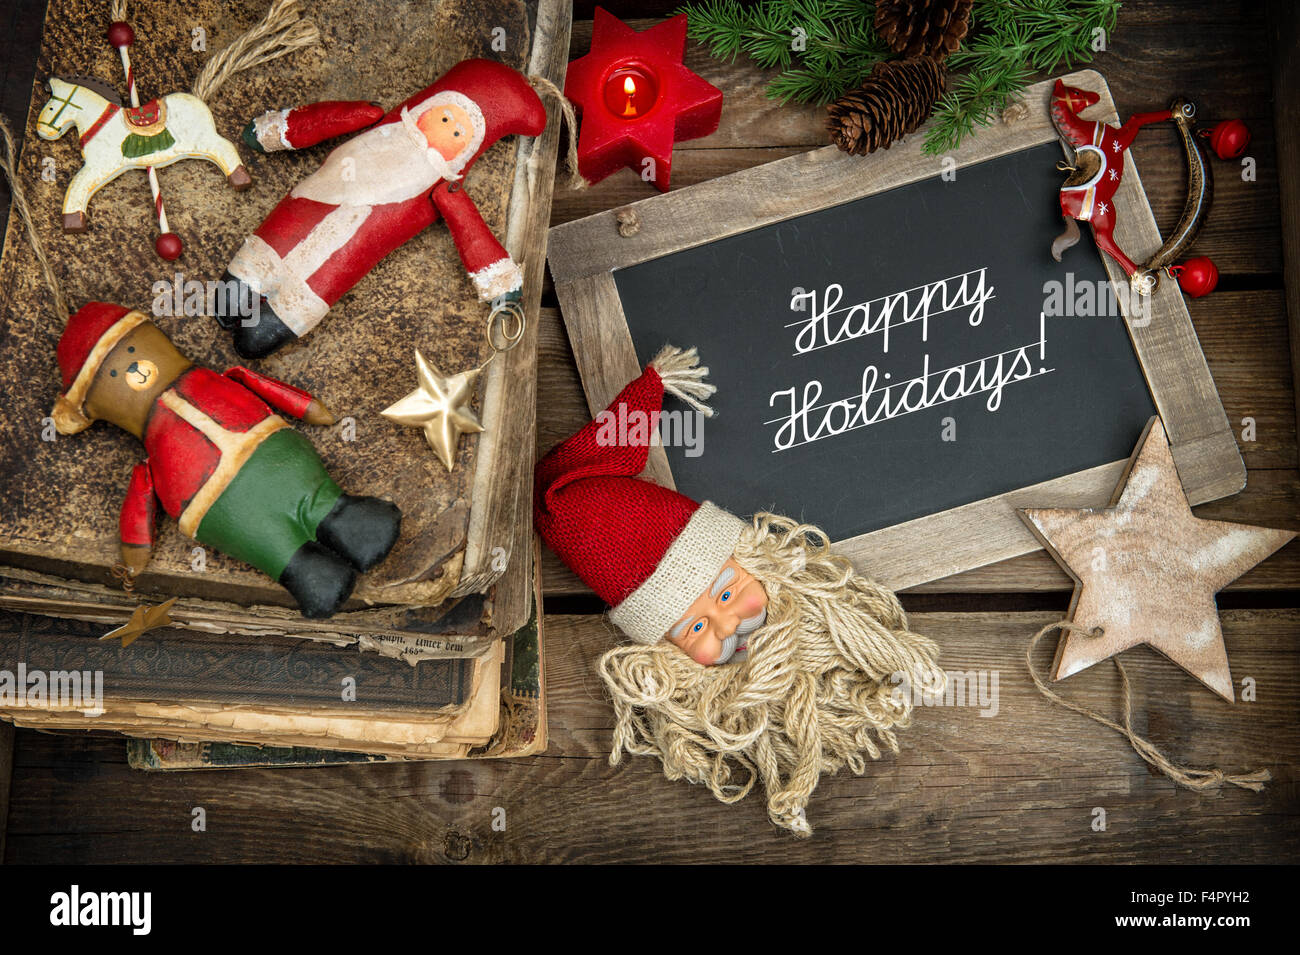 Christmas decoration with vintage baubles and toys on wooden background. Nostalgic retro style picture. Stock Photo